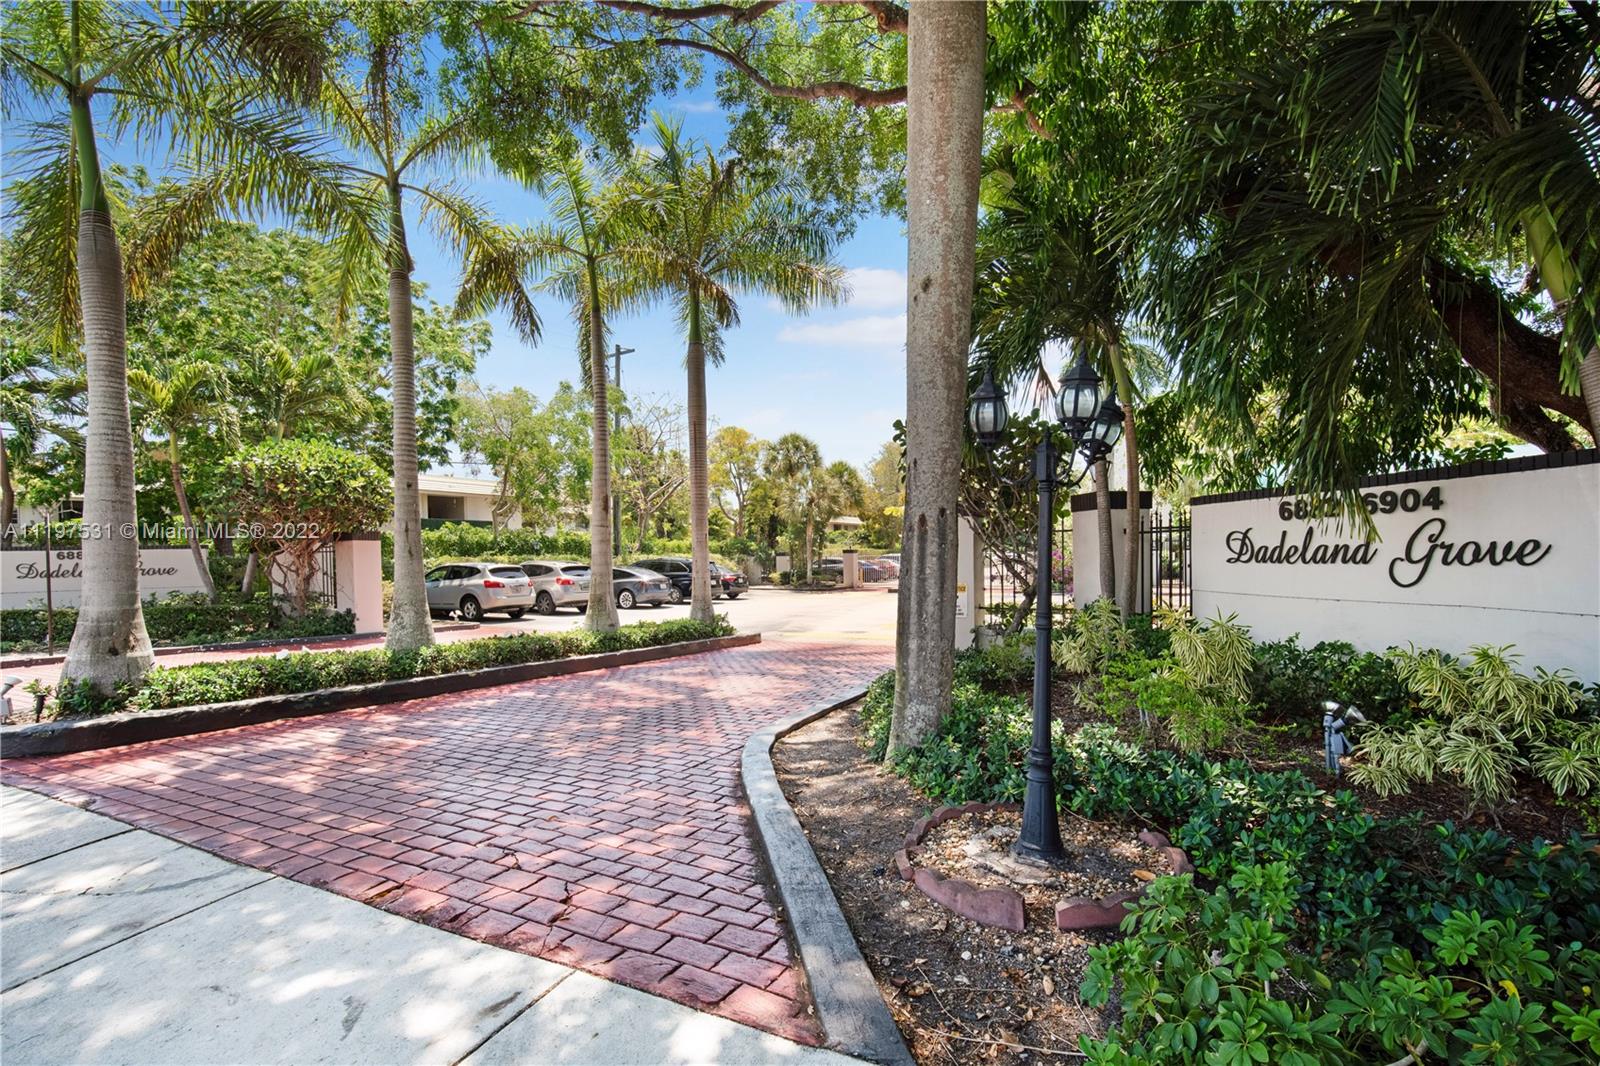 Welcome home to this large 2 bedroom/2 bath apartment in the heart of Pinecrest. This unit has tile floors throughout and laminate floors in the 2nd bedroom. The kitchen was recently remodeled with wood cabinets and quartz countertops. The balcony has a private, tropical feel with pool view. The Dadeland Grove community has a gated entrance, pool and hot tub area, and security guard on site. The location is exceptional- 2 minutes from the Dadeland area and a 10 minute drive to the University of Miami/Coral Gables.